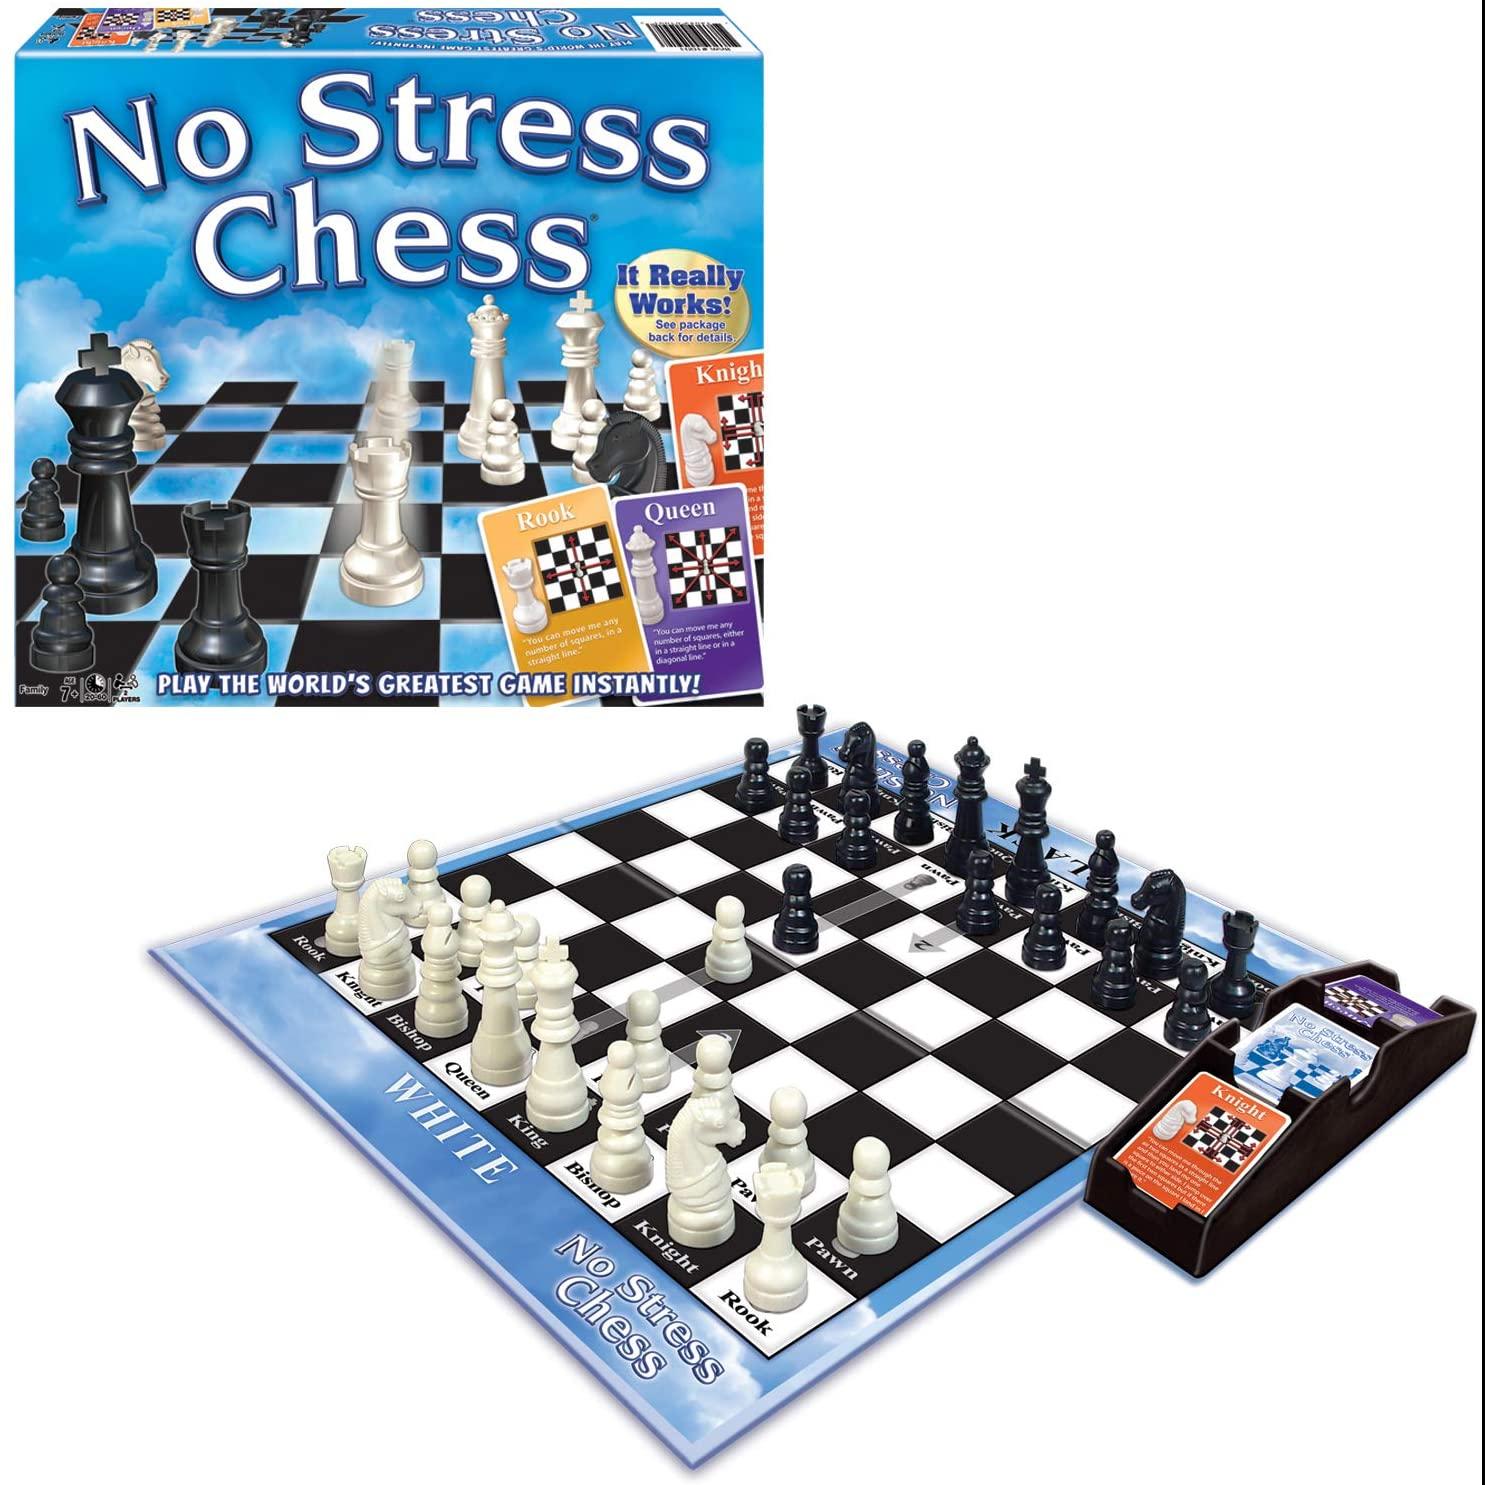 No Stress Chess Board Game for $9.79